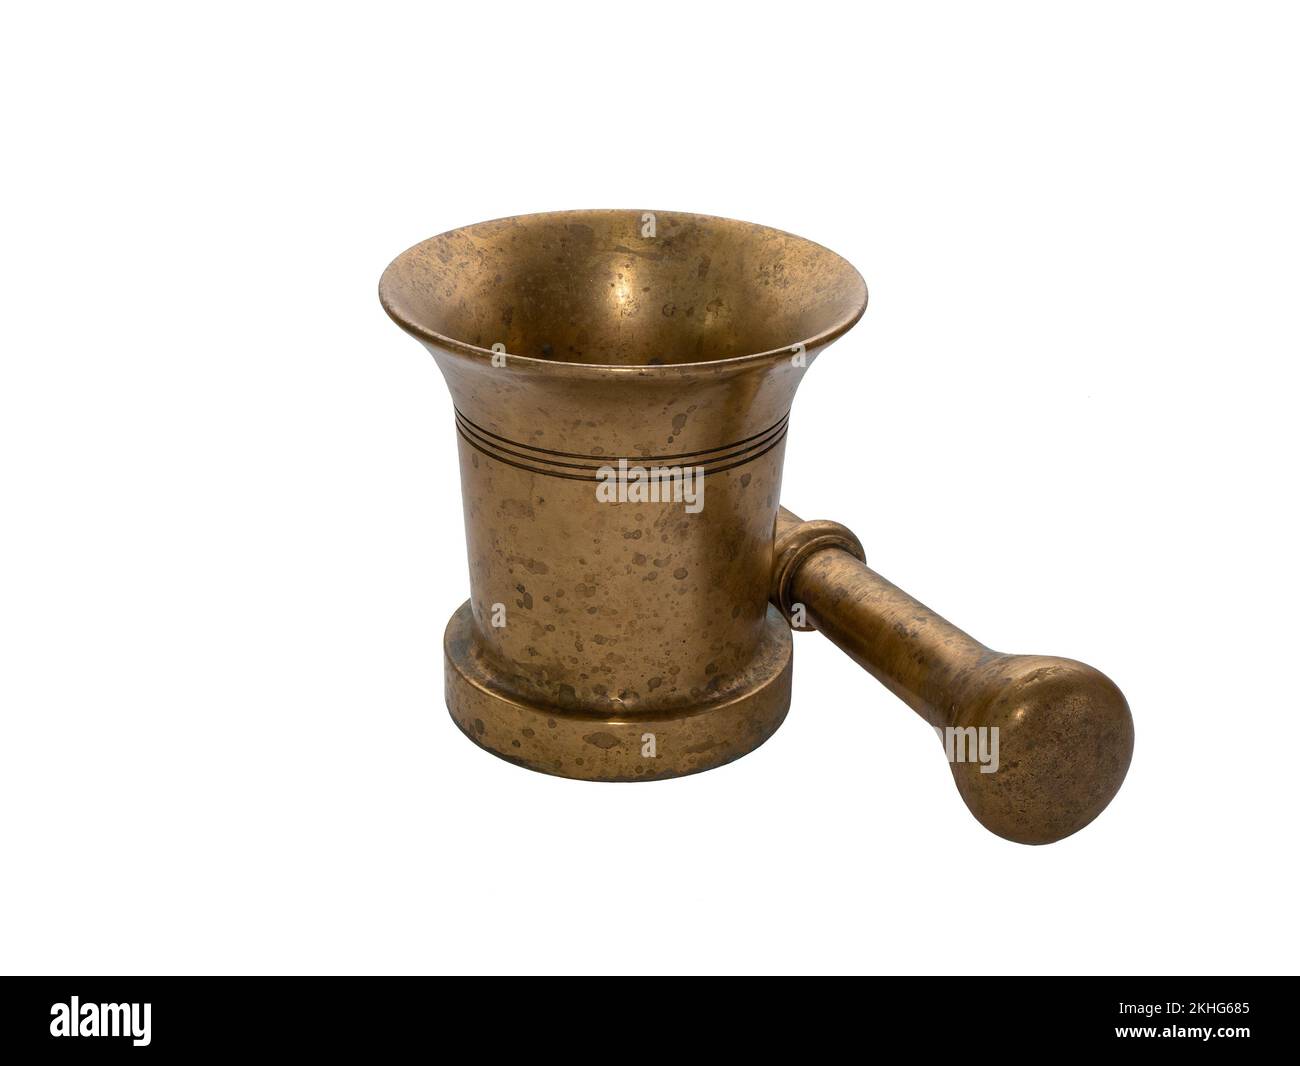 Old brass mortar and pestle lying next to it, isolated. Equipment for grinding and blending different ingredients. Concept of alchemy, herbalism, cook Stock Photo